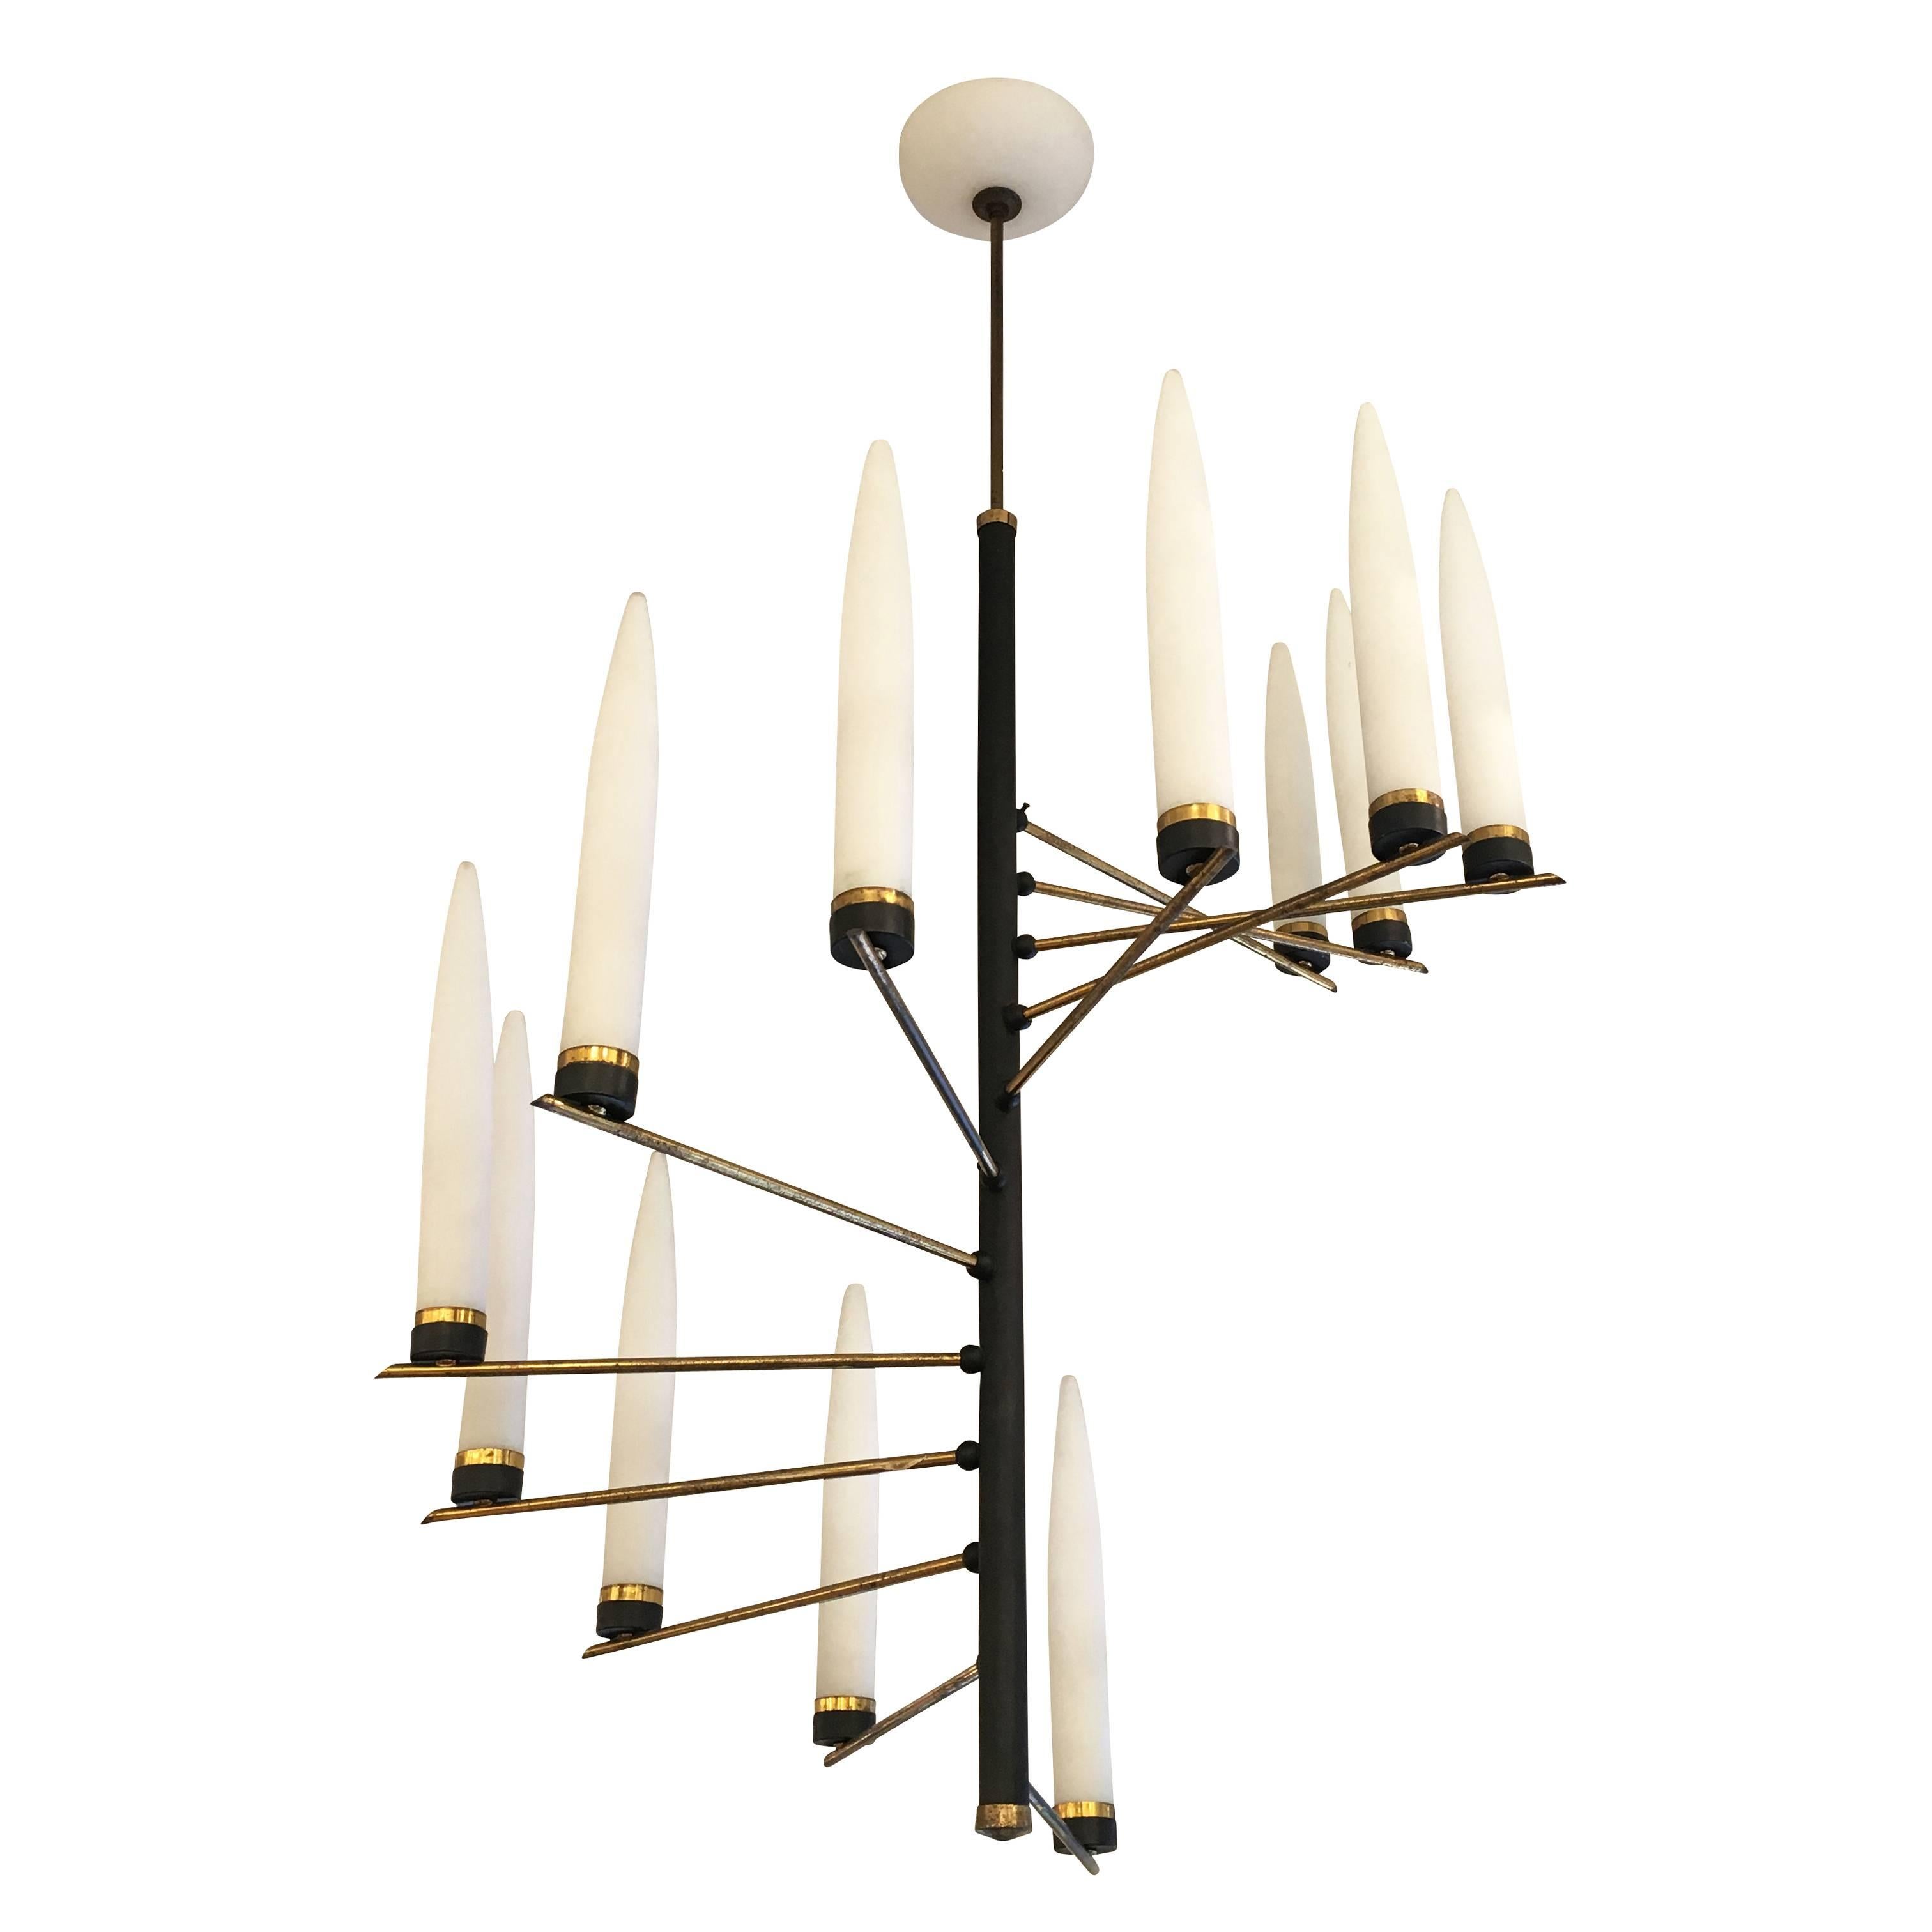 Charming Italian midcentury spiral chandelier. The narrow frosted glasses were typical of this manufacturer. The frame is lacquered black with brass details and the canopy is made of frosted glass. Since these pieces were hand made some of the arms